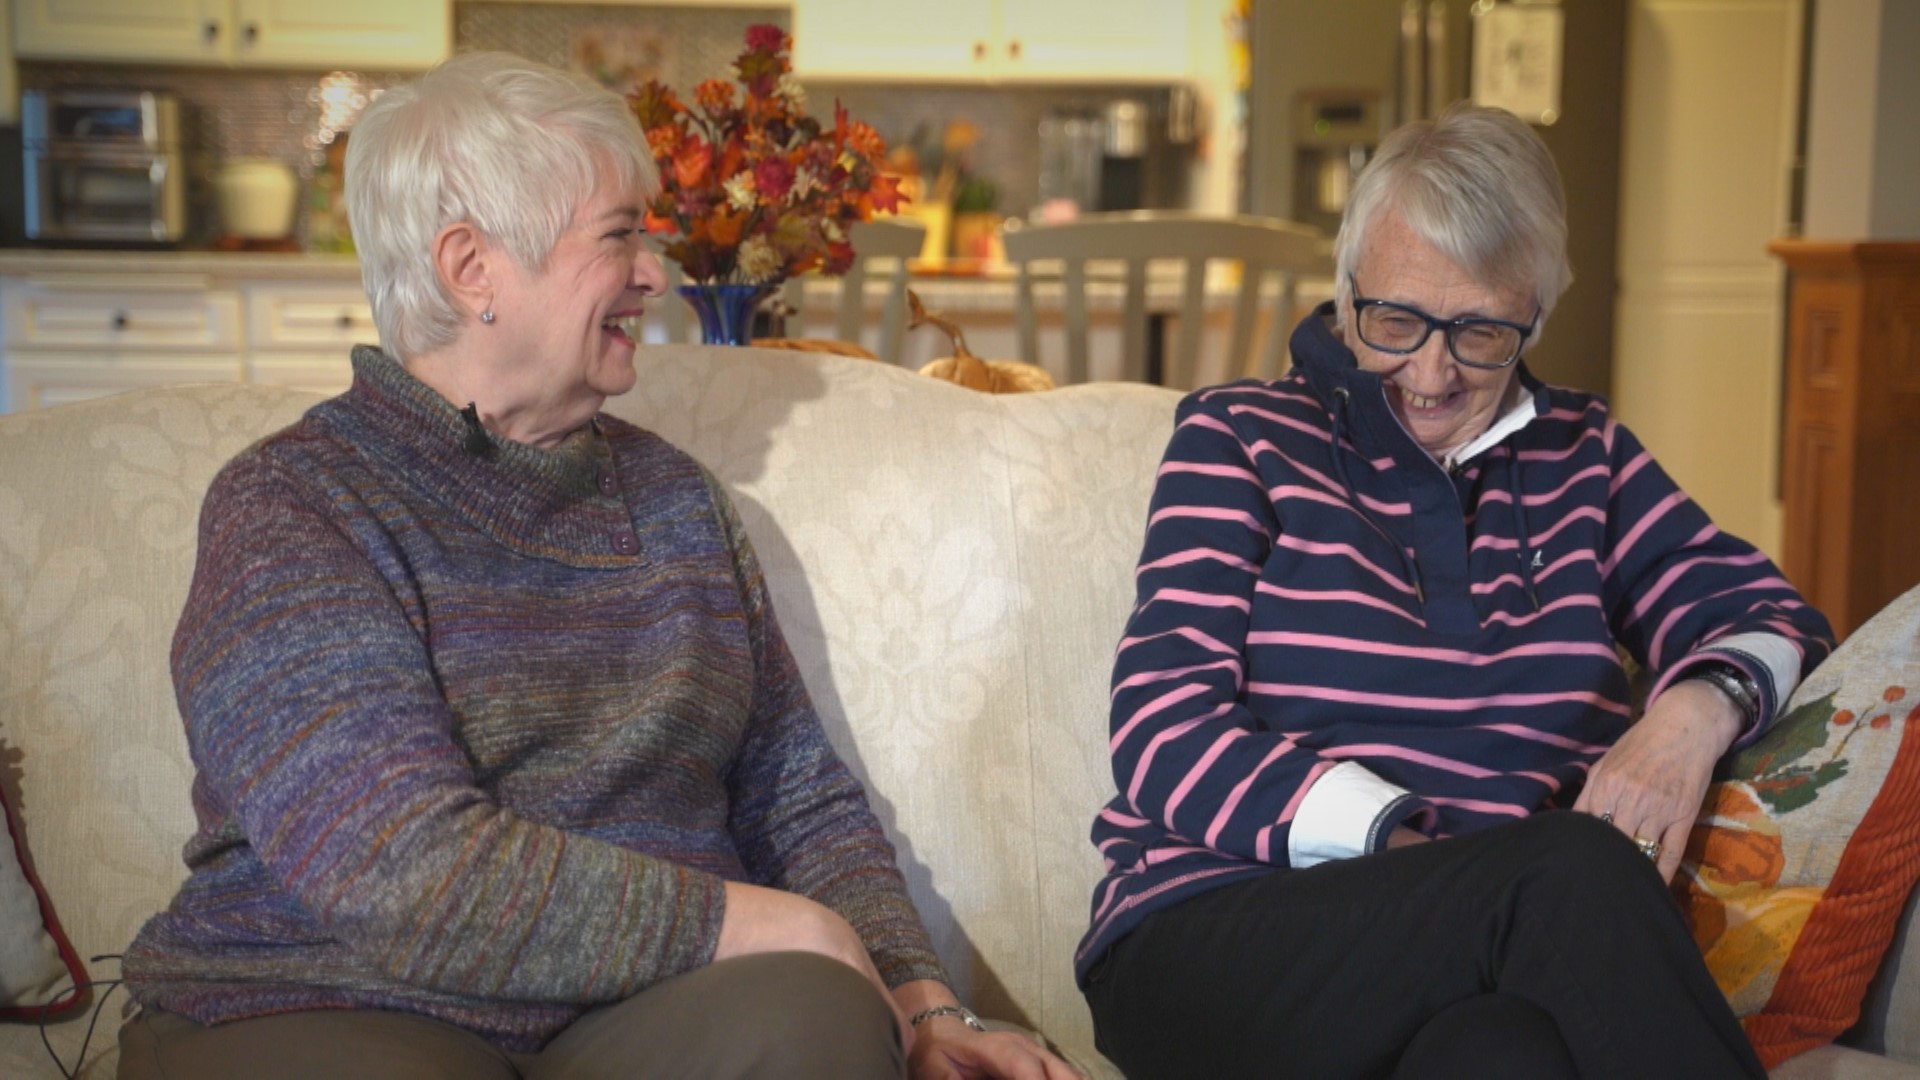 Eileen Ocone and Janis Auidon always wondered what happened to each other. Now, they've got a lot of catching up to do.